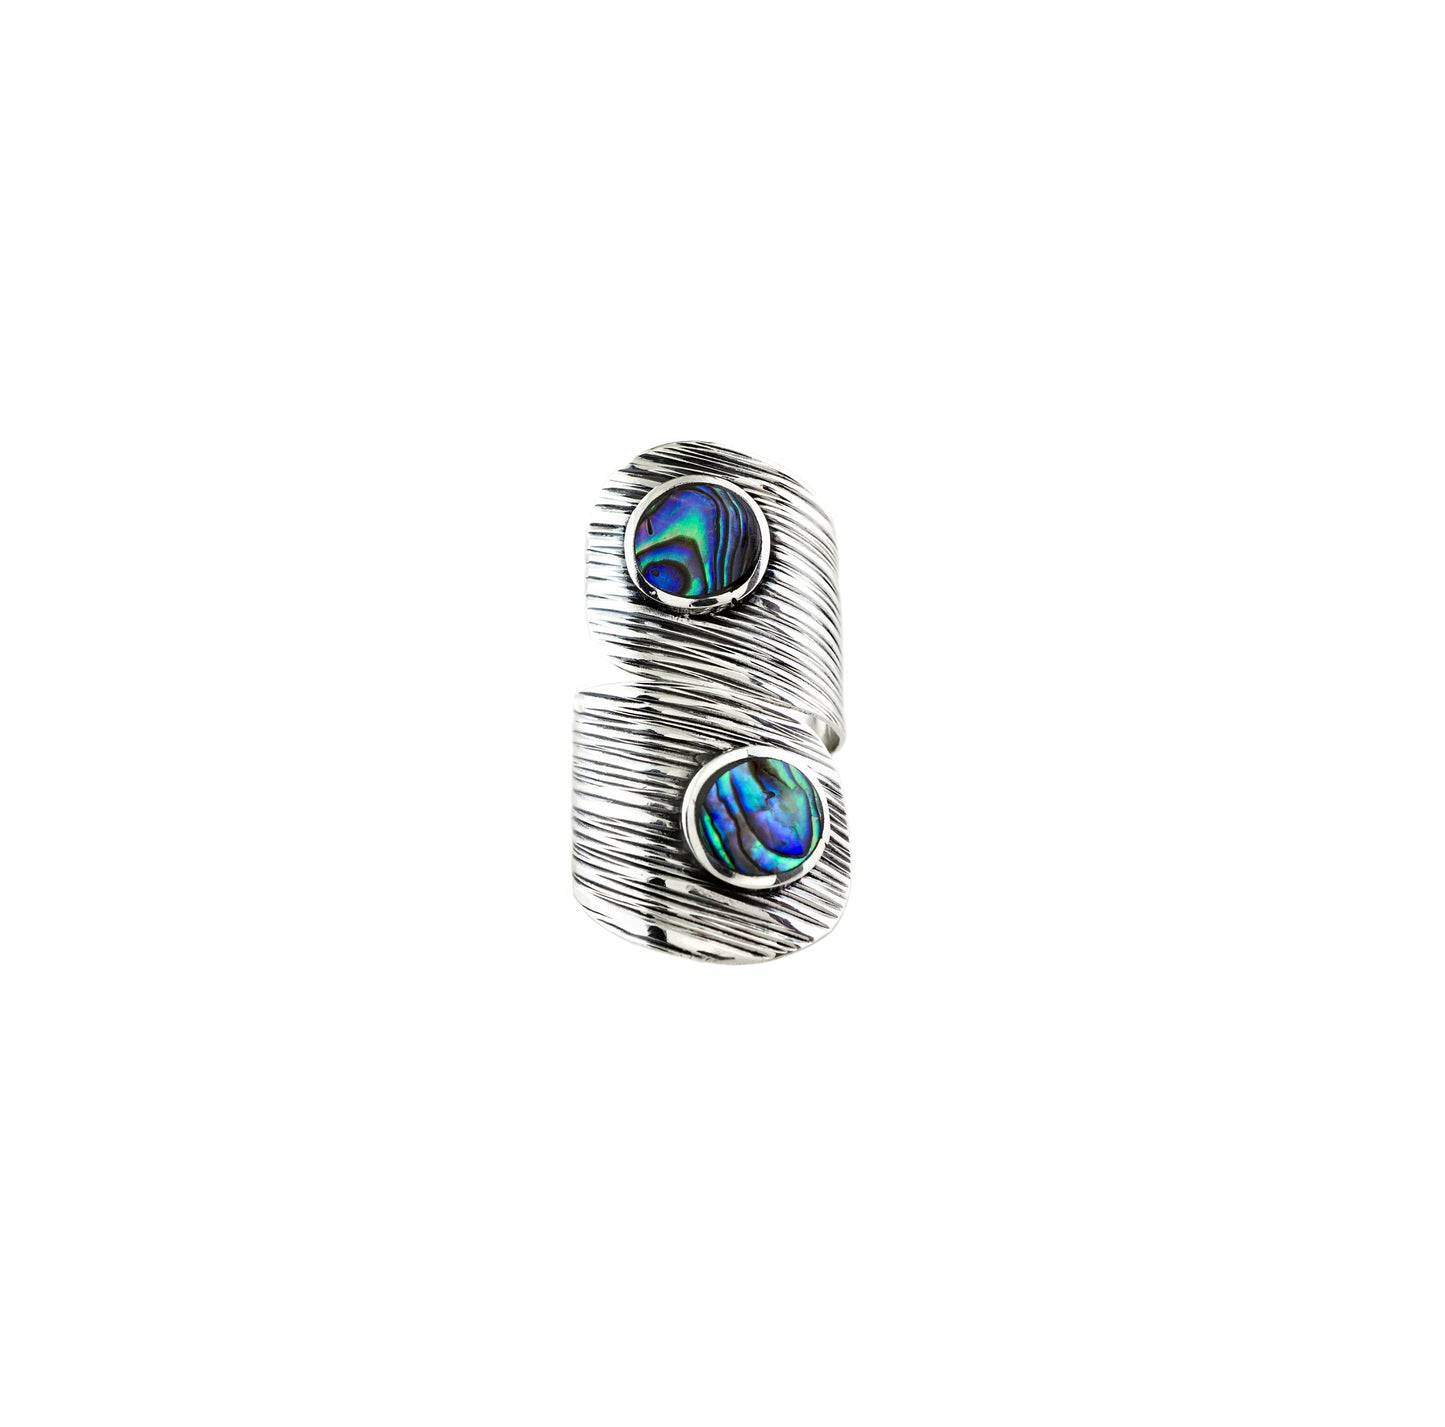 Abalone Shell Sterling Silver Wrap Ring - Twisted Earth Artistry